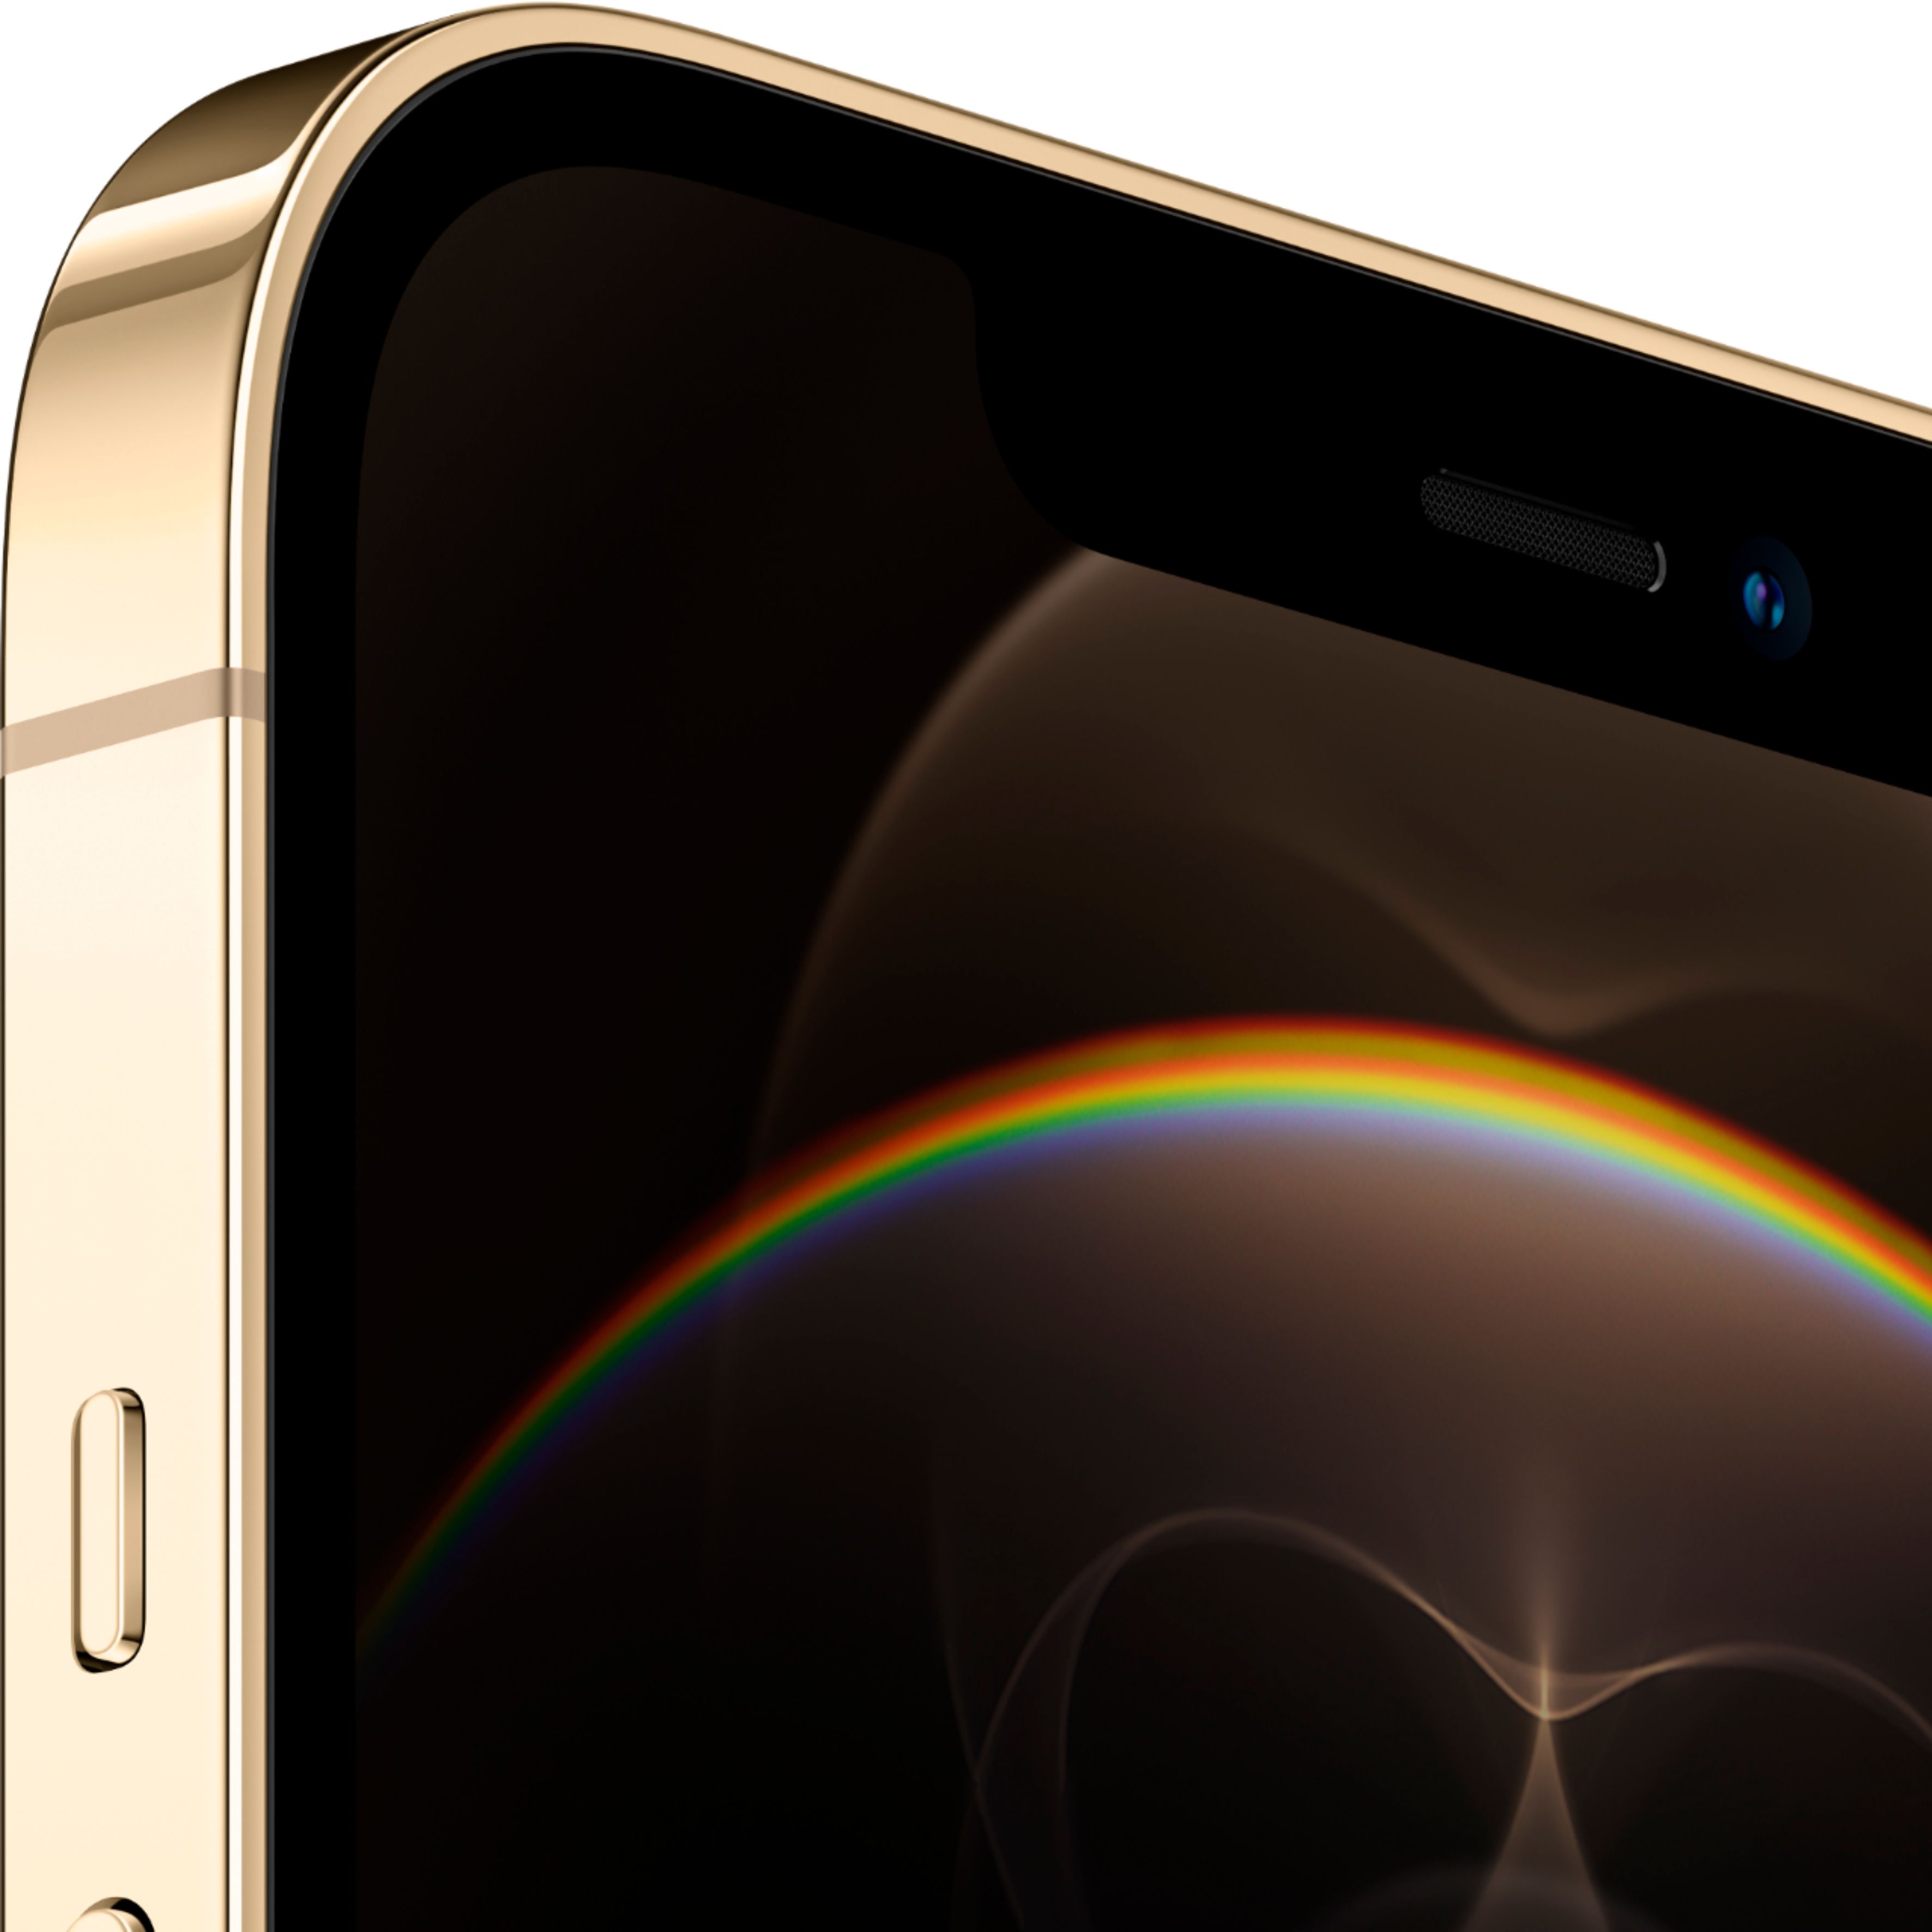 Restored Apple iPhone 12 Pro Max 128GB Gold LTE Cellular T-Mobile MG9R3LL/A (Refurbished) - image 3 of 5